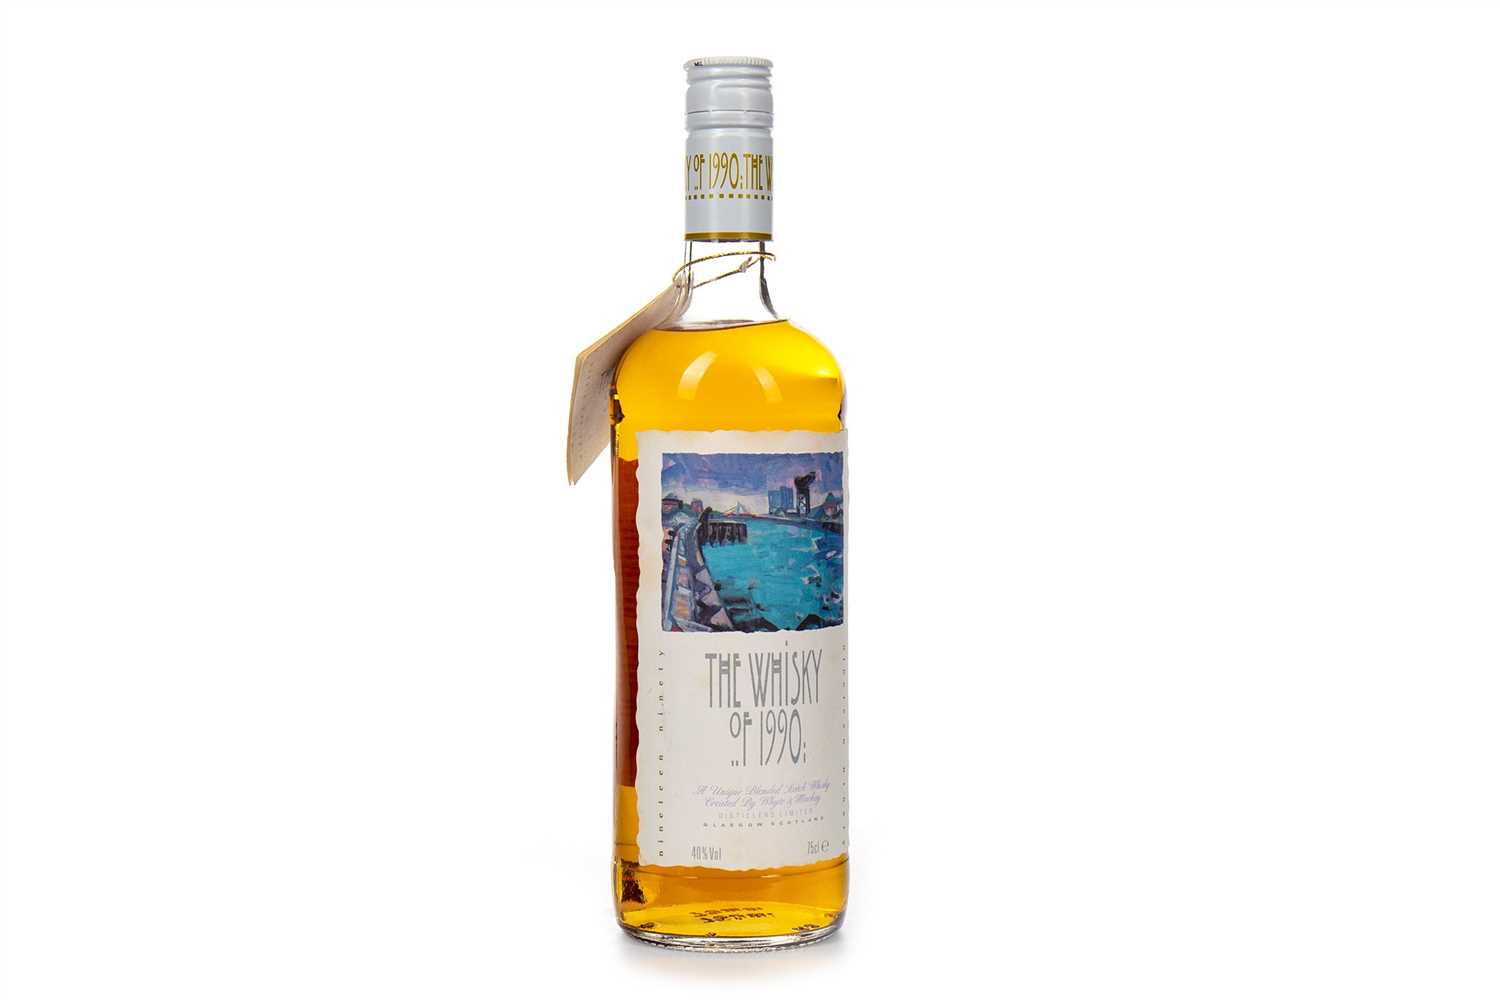 Lot 402 - THE WHISKY OF 1990